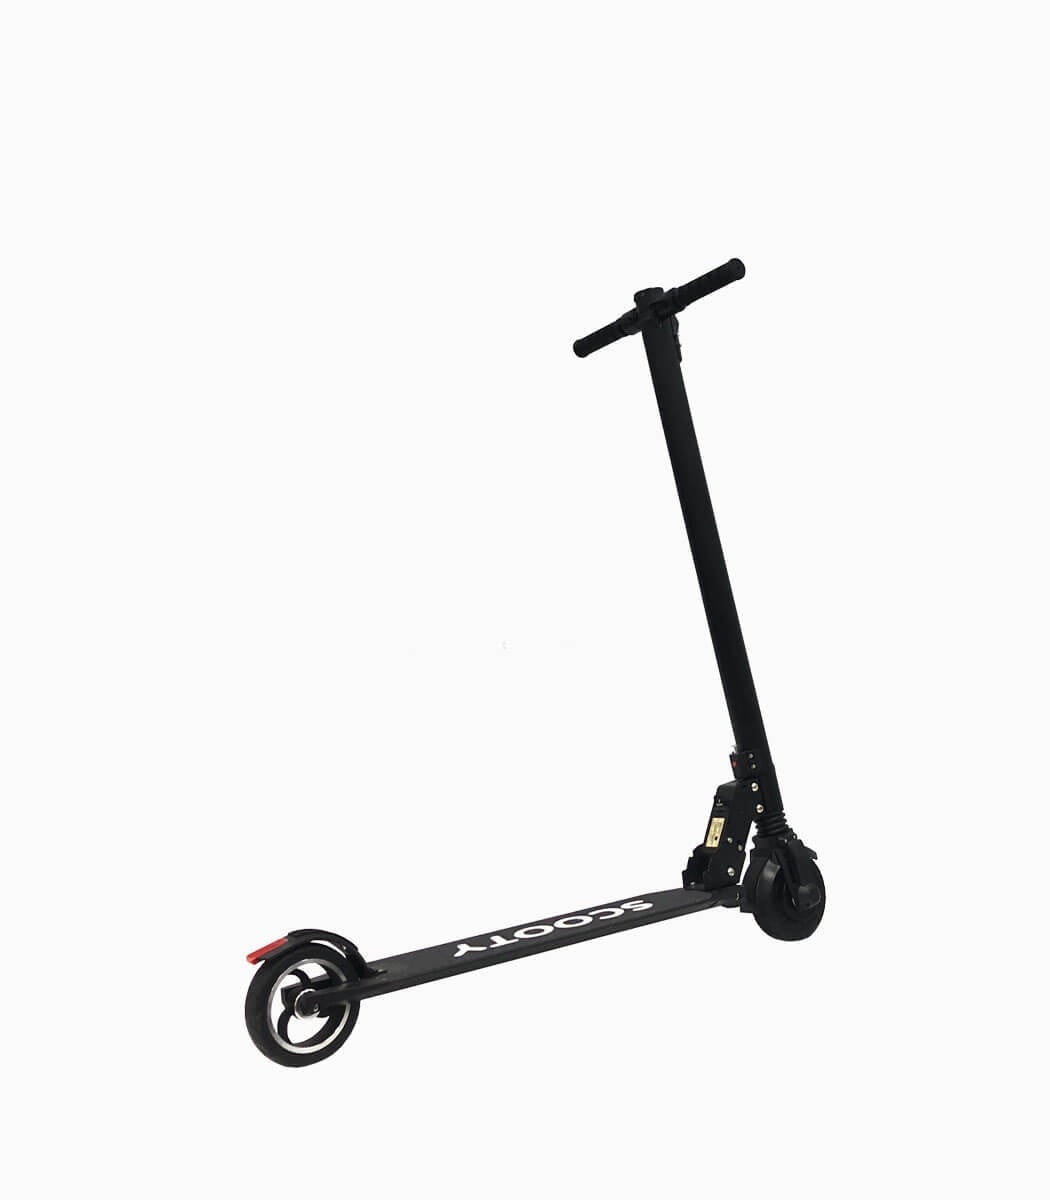 MOBOT SCOOTY F1K (BLACK4AH) UL2272 certified lightweight e-scooter rear angled right V1